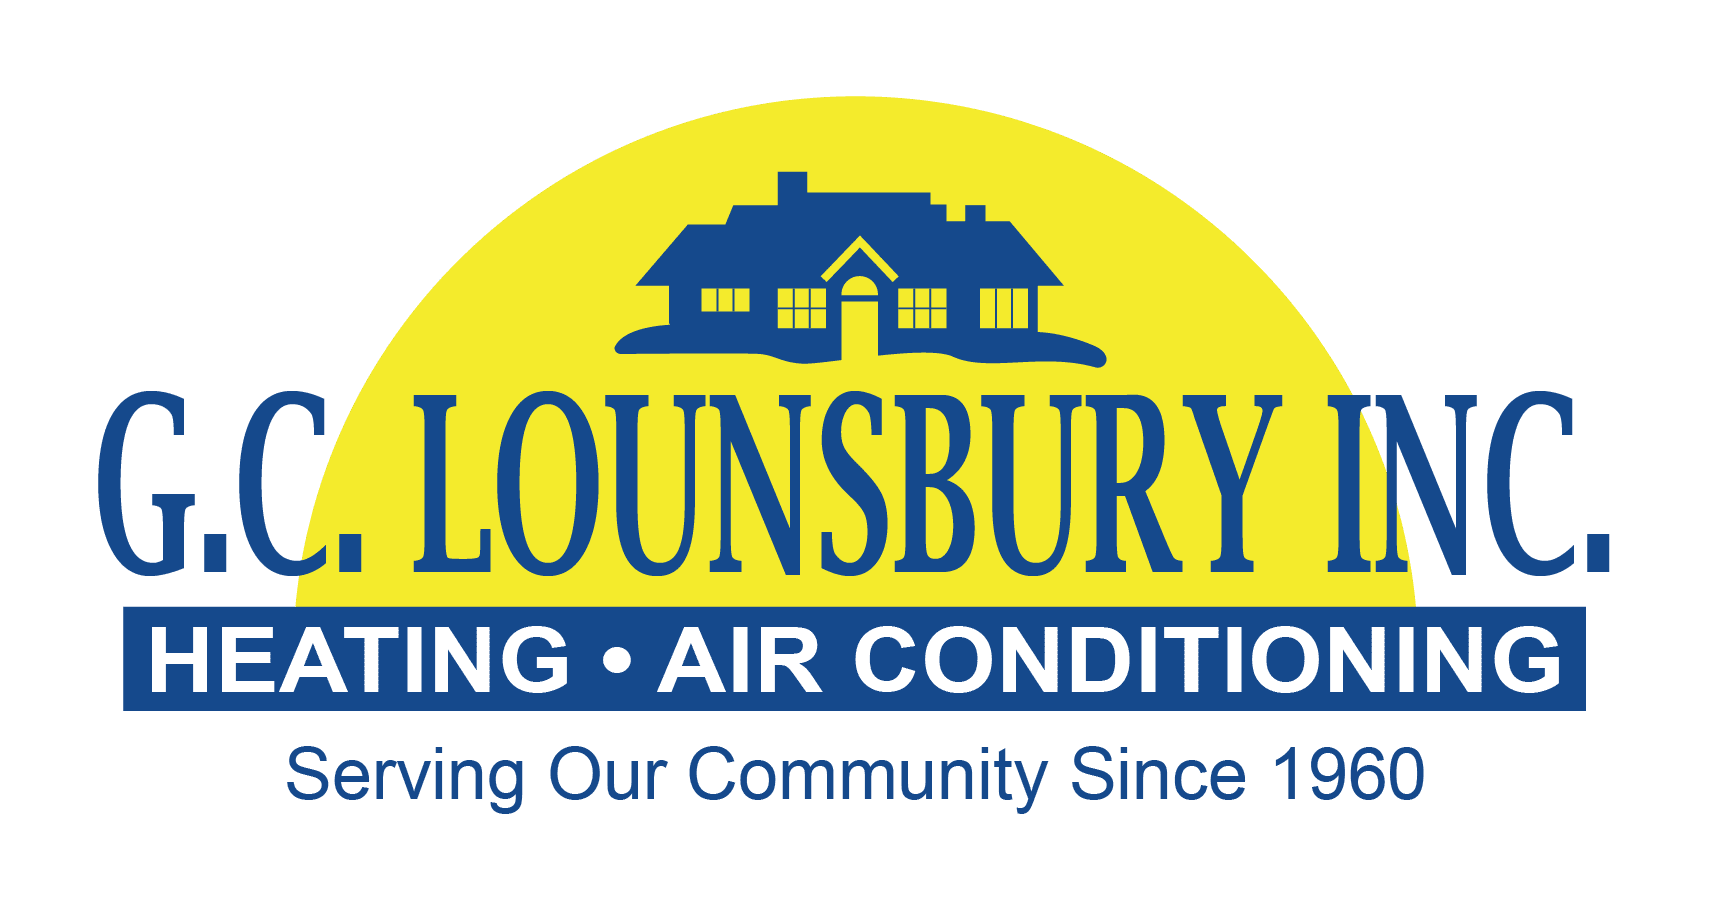 G.C. Lounsbury Inc. Heating & Air Conditioning logo "Serving Our Community Since 1960"